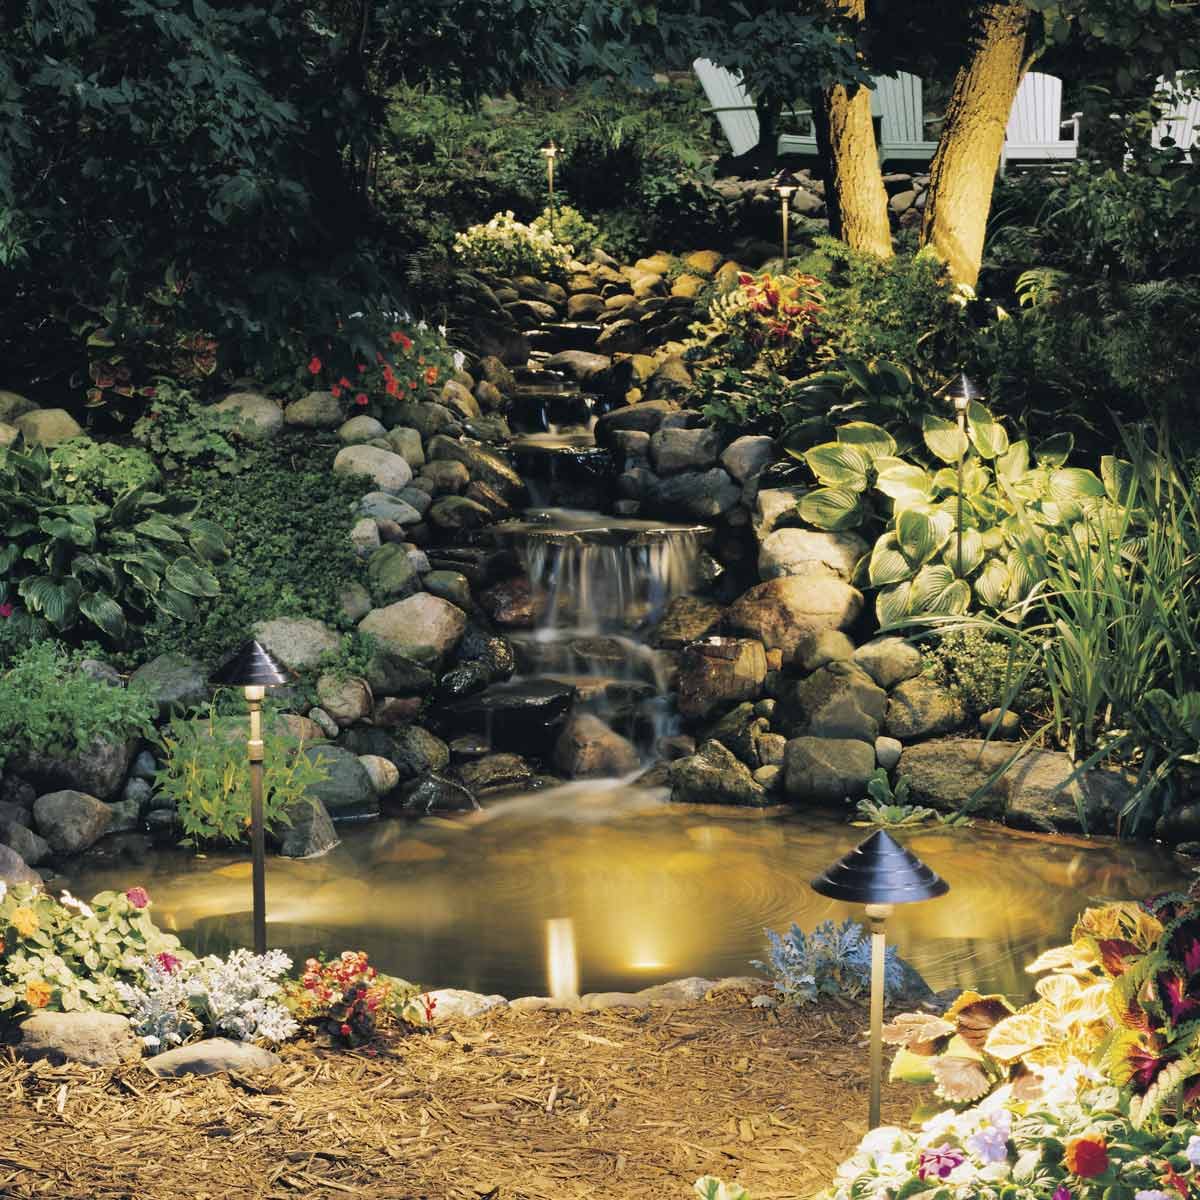 The Easiest Way to Install Low Voltage Landscape Lighting